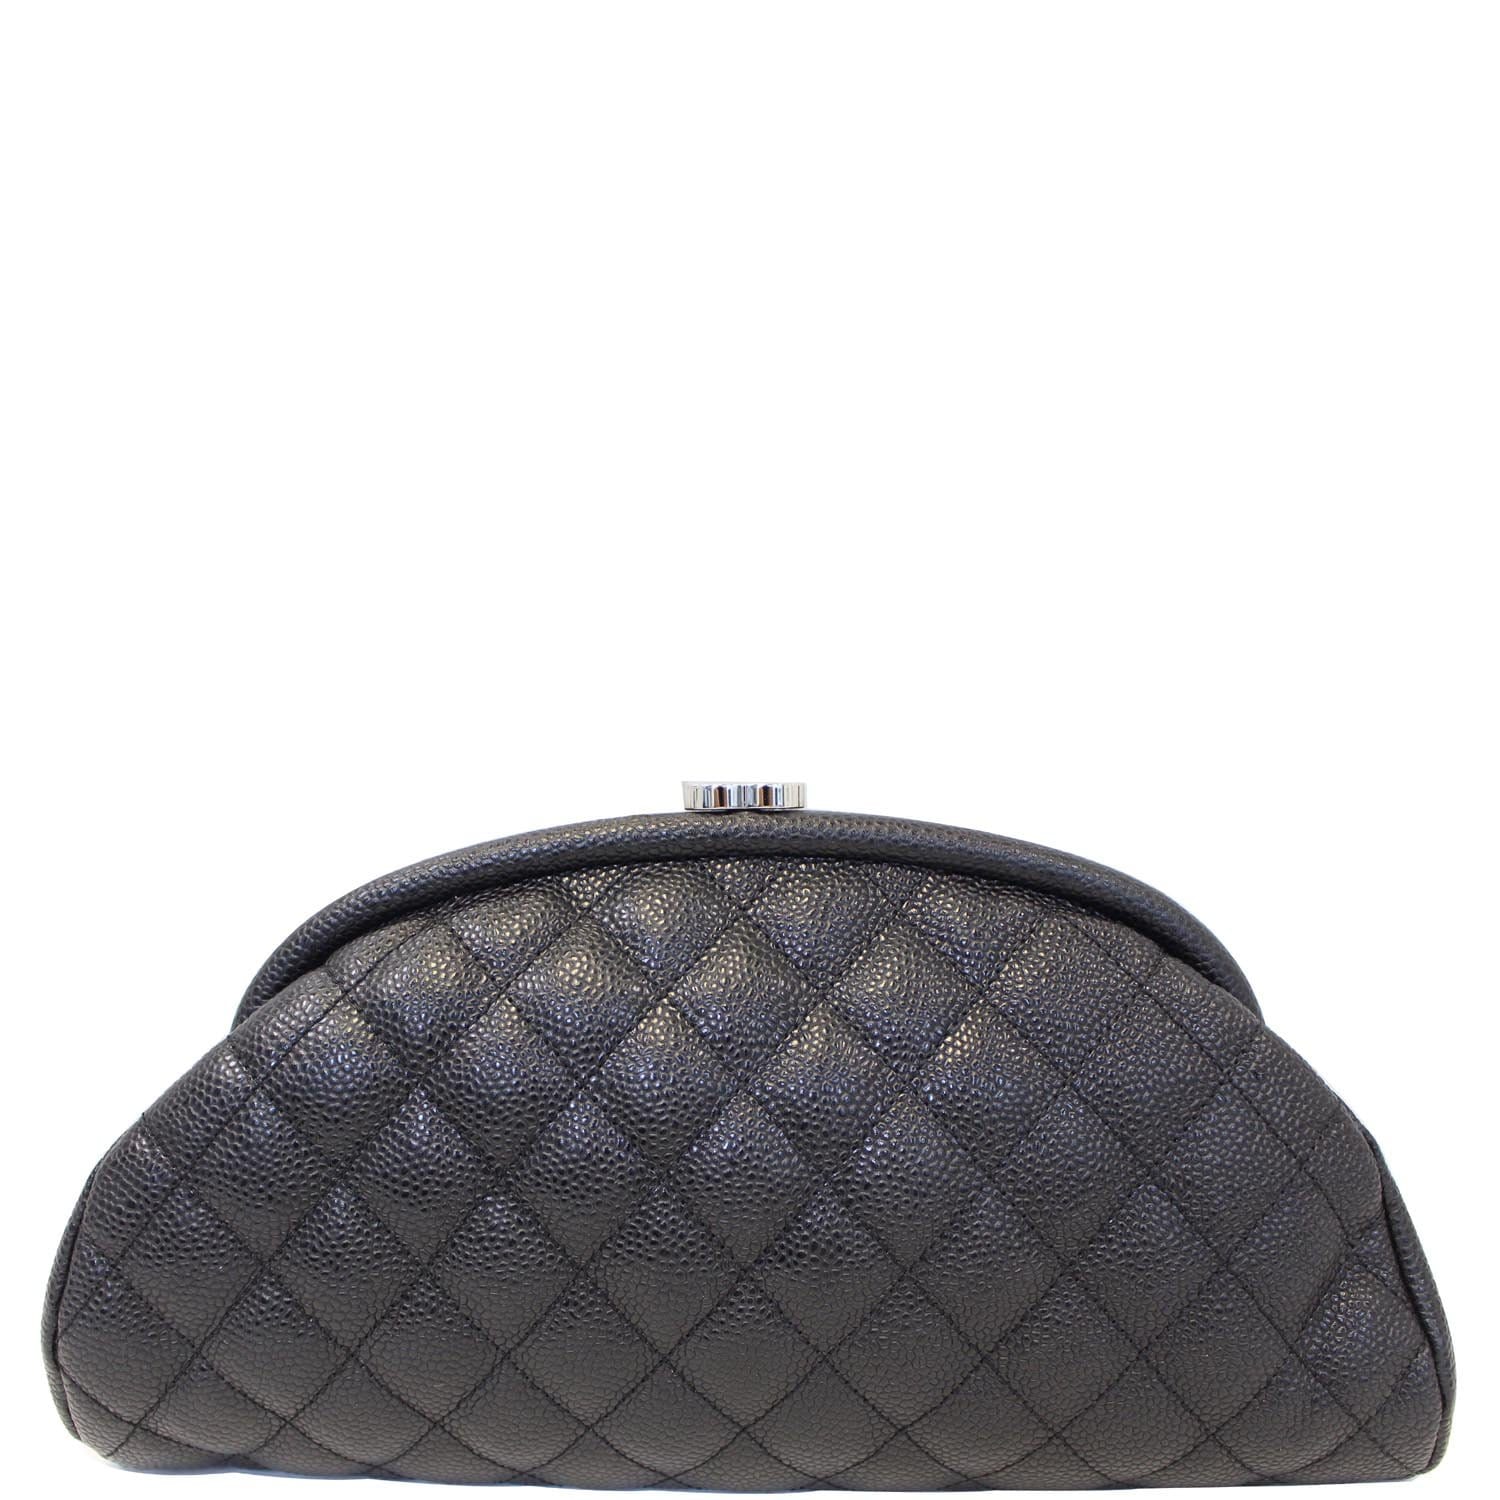 Timeless/classique leather clutch bag Chanel Black in Leather - 36465595